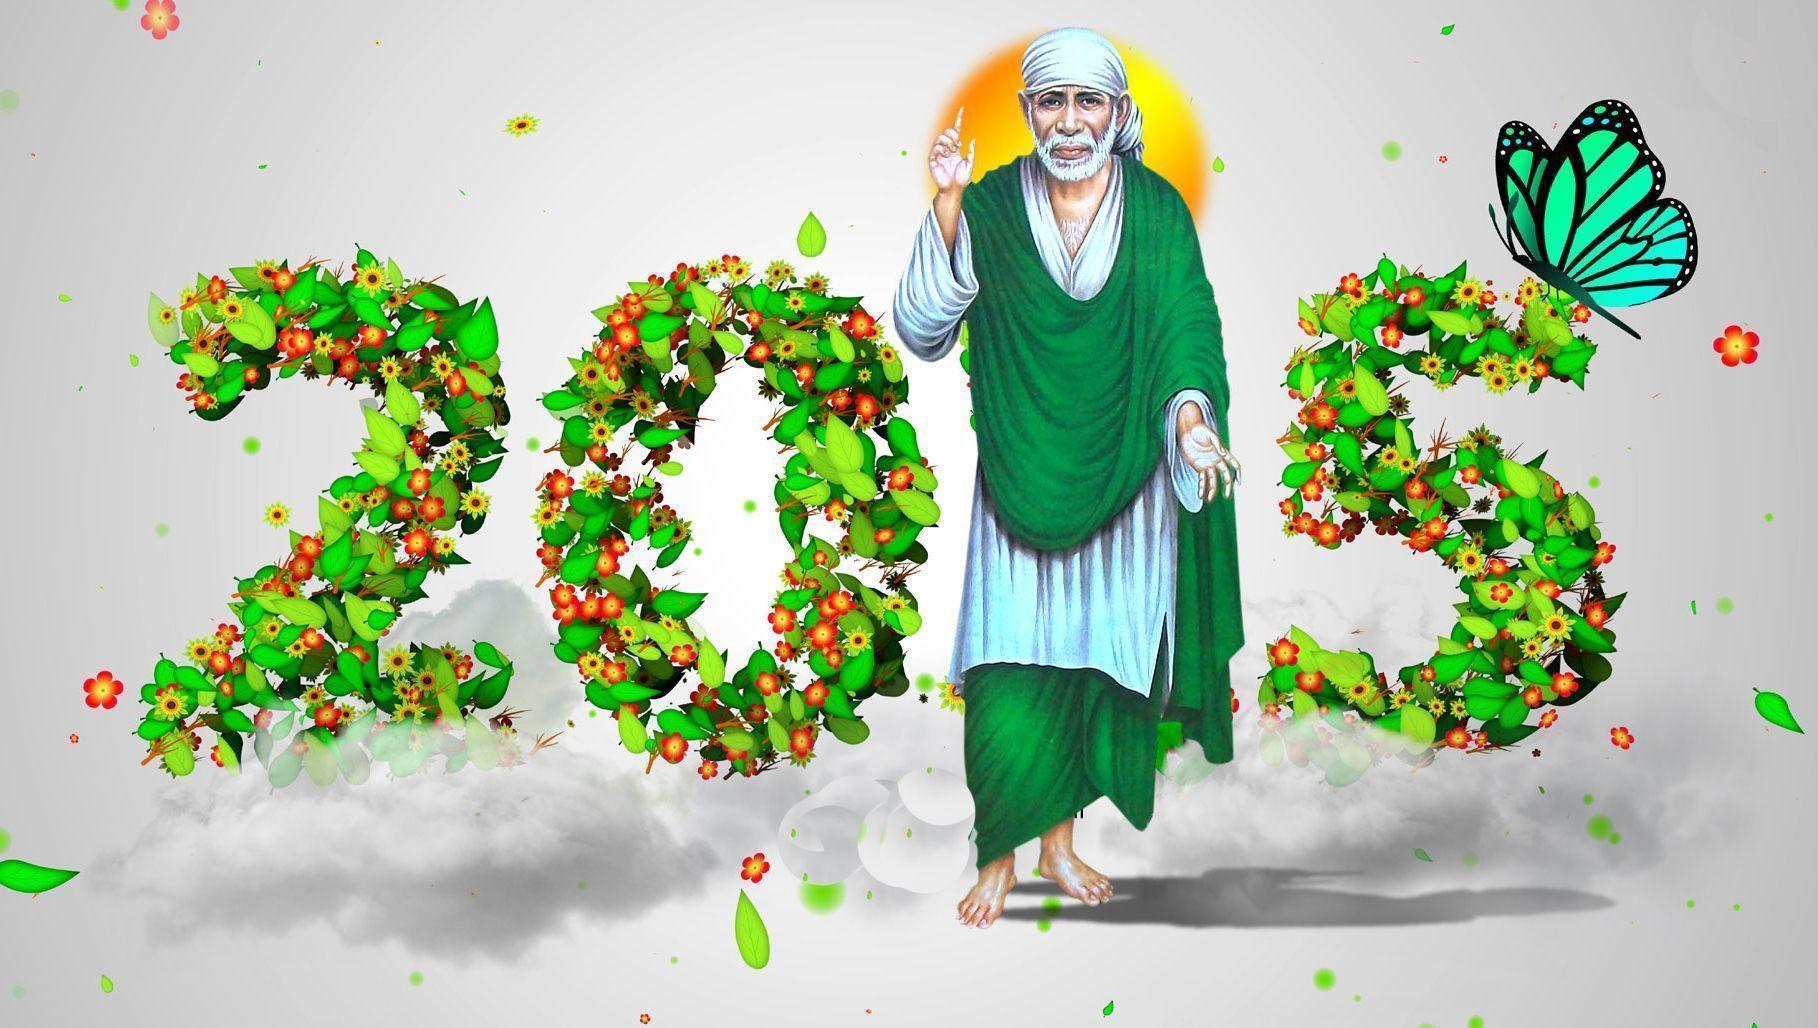 Happy New Year 2015 Image Wishes, HD Wallpaper. ICarry4u